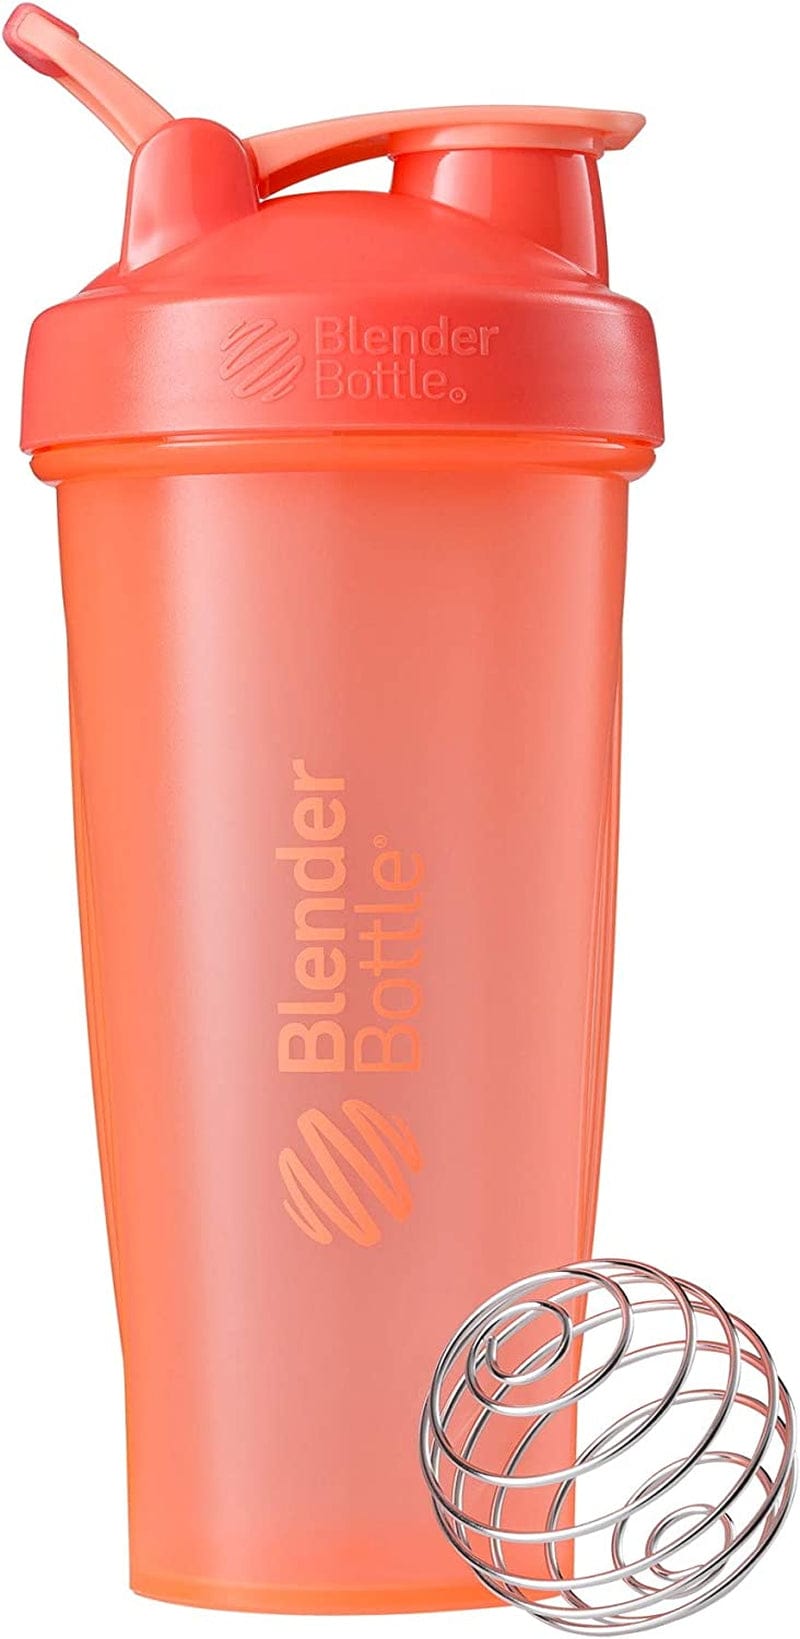 Blenderbottle Classic Shaker Bottle Perfect for Protein Shakes and Pre Workout, 20-Ounce, Clear/Black/Black & Classic V2 Shaker Bottle Perfect for Protein Shakes and Pre Workout, 28-Ounce, Black Home & Garden > Kitchen & Dining > Barware BlenderBottle Coral Bottle 28-Ounce